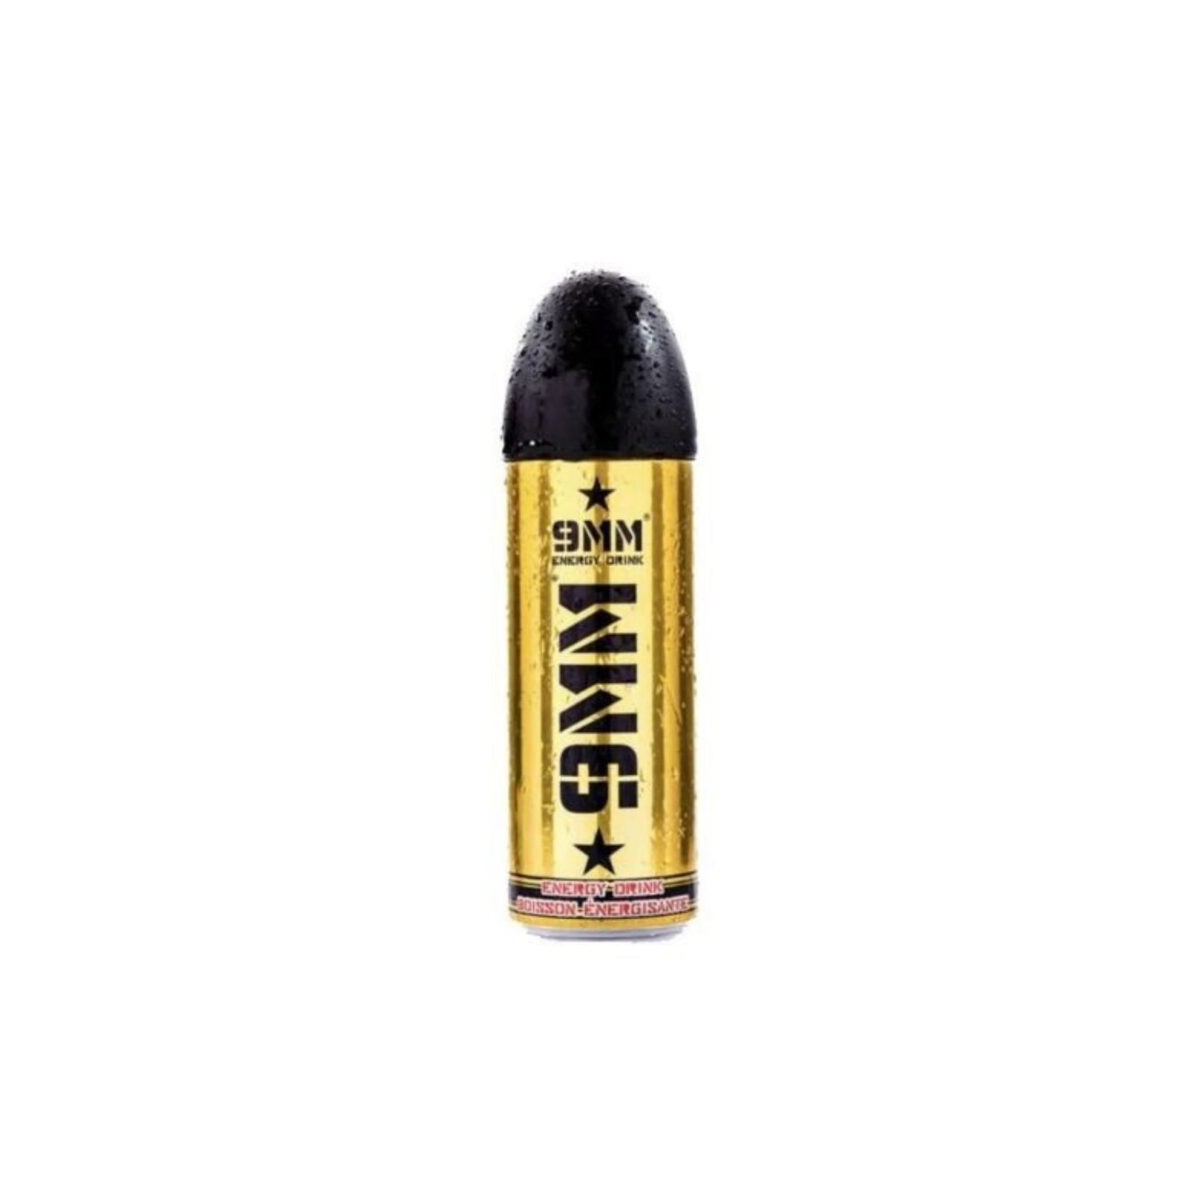 DRANK 9MM ENERGY DRINK CAN 24X250ML